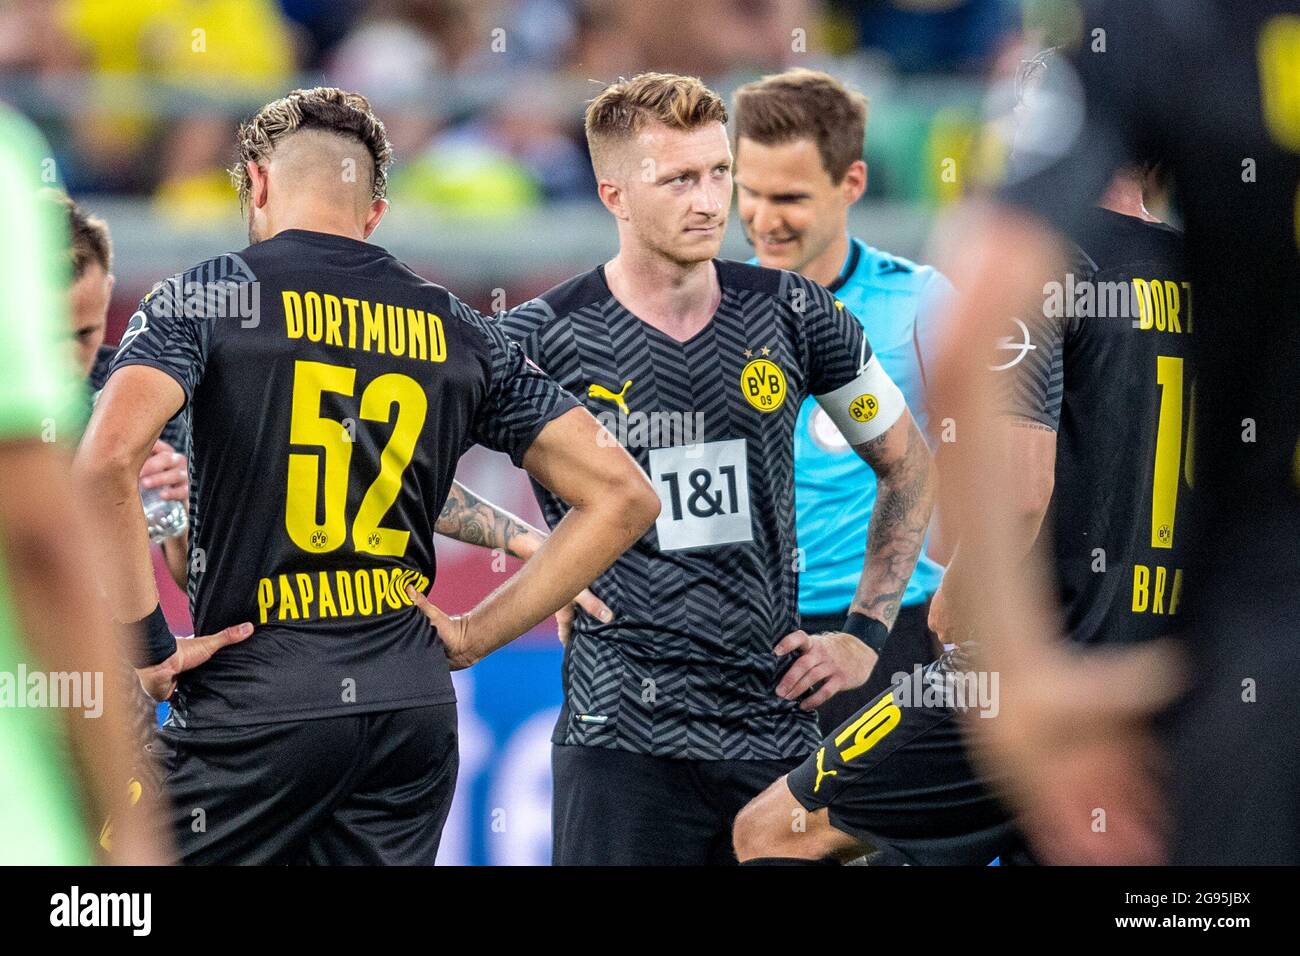 St. Gallen, Switzerland. 24th July, 2021. Football: Bundesliga, Test  matches, Borussia Dortmund - Athletic Bilbao at Kybunpark. Dortmund's Marco  Reus looks disappointed. Credit: David Inderlied/dpa - IMPORTANT NOTE: In  accordance with the